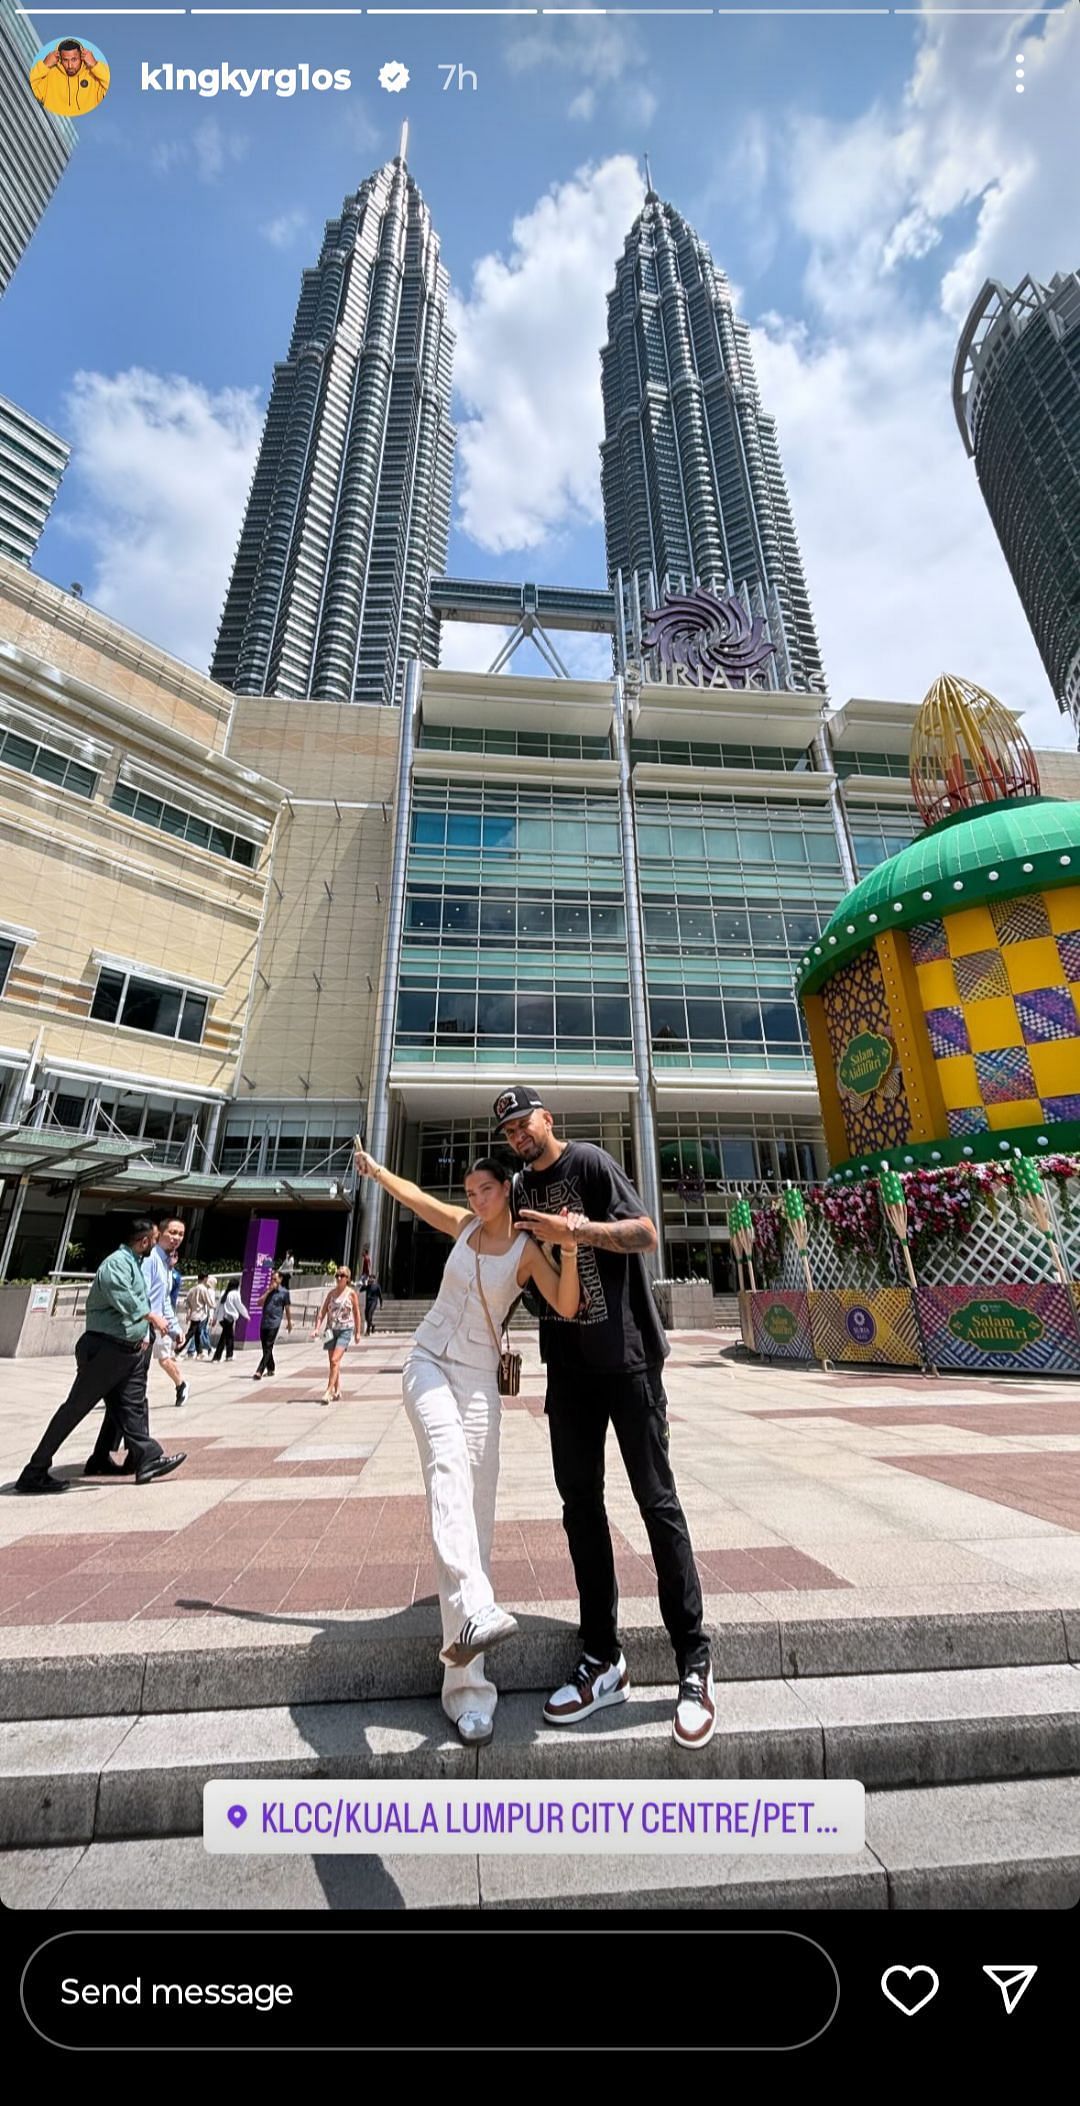 Kyrgios&#039; Instagram post featuring himself and girlfriend Hatzi at the Kuala Lumpur City Centre